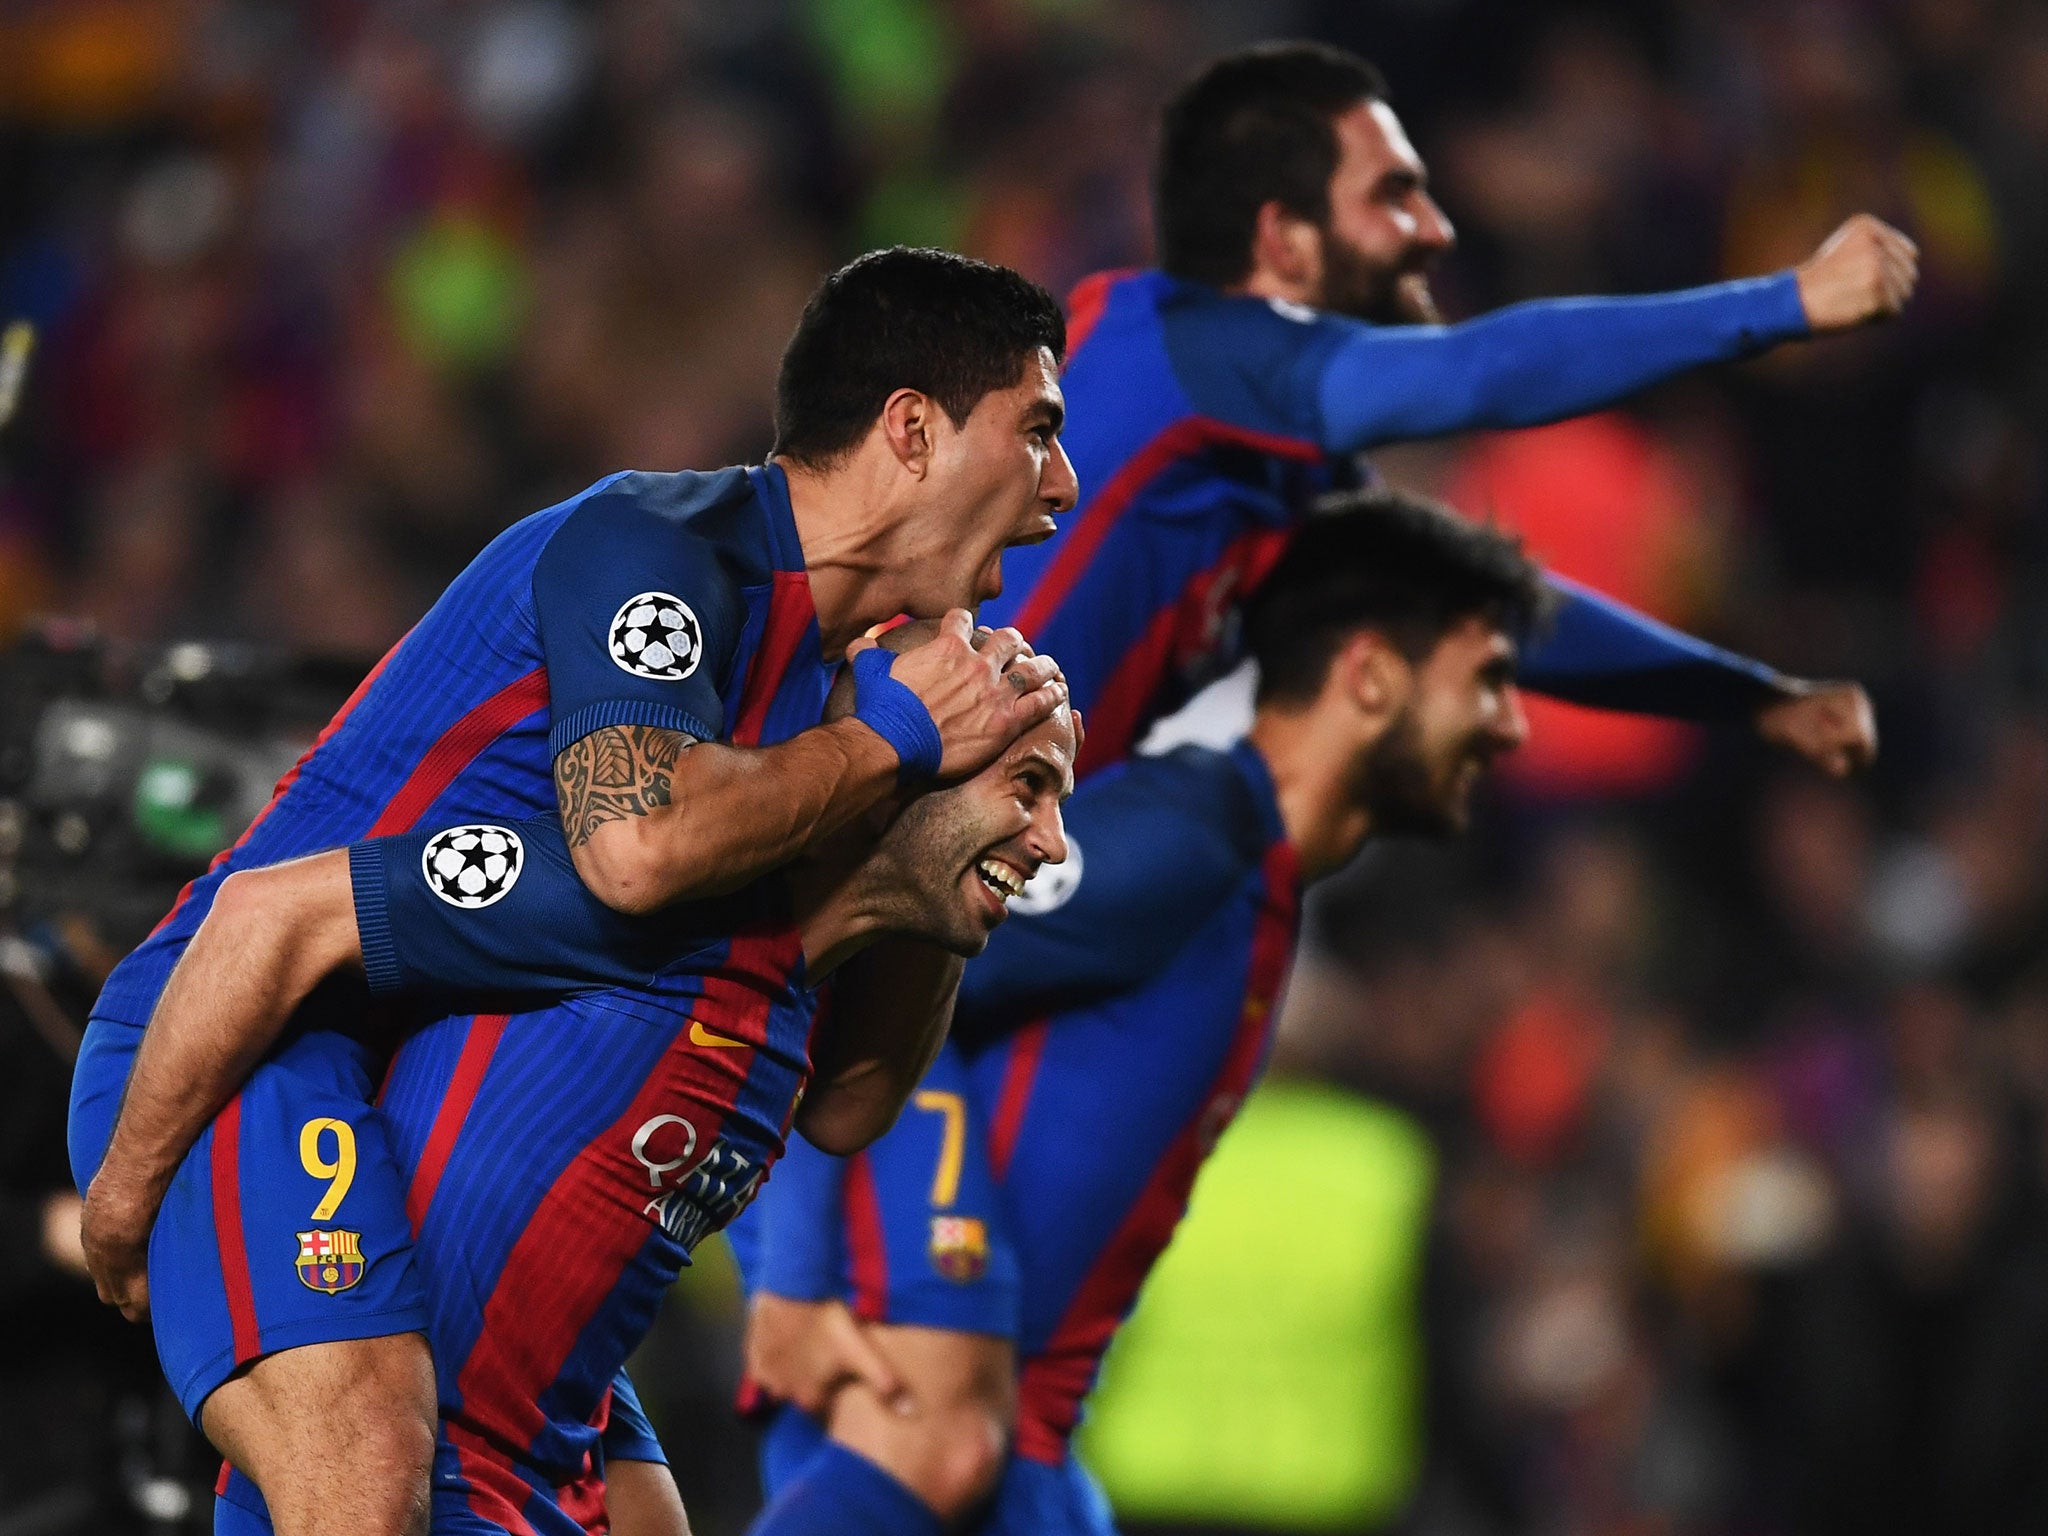 Barcelona's players celebrate after overcoming PSG to reach the last eight of the Champions League